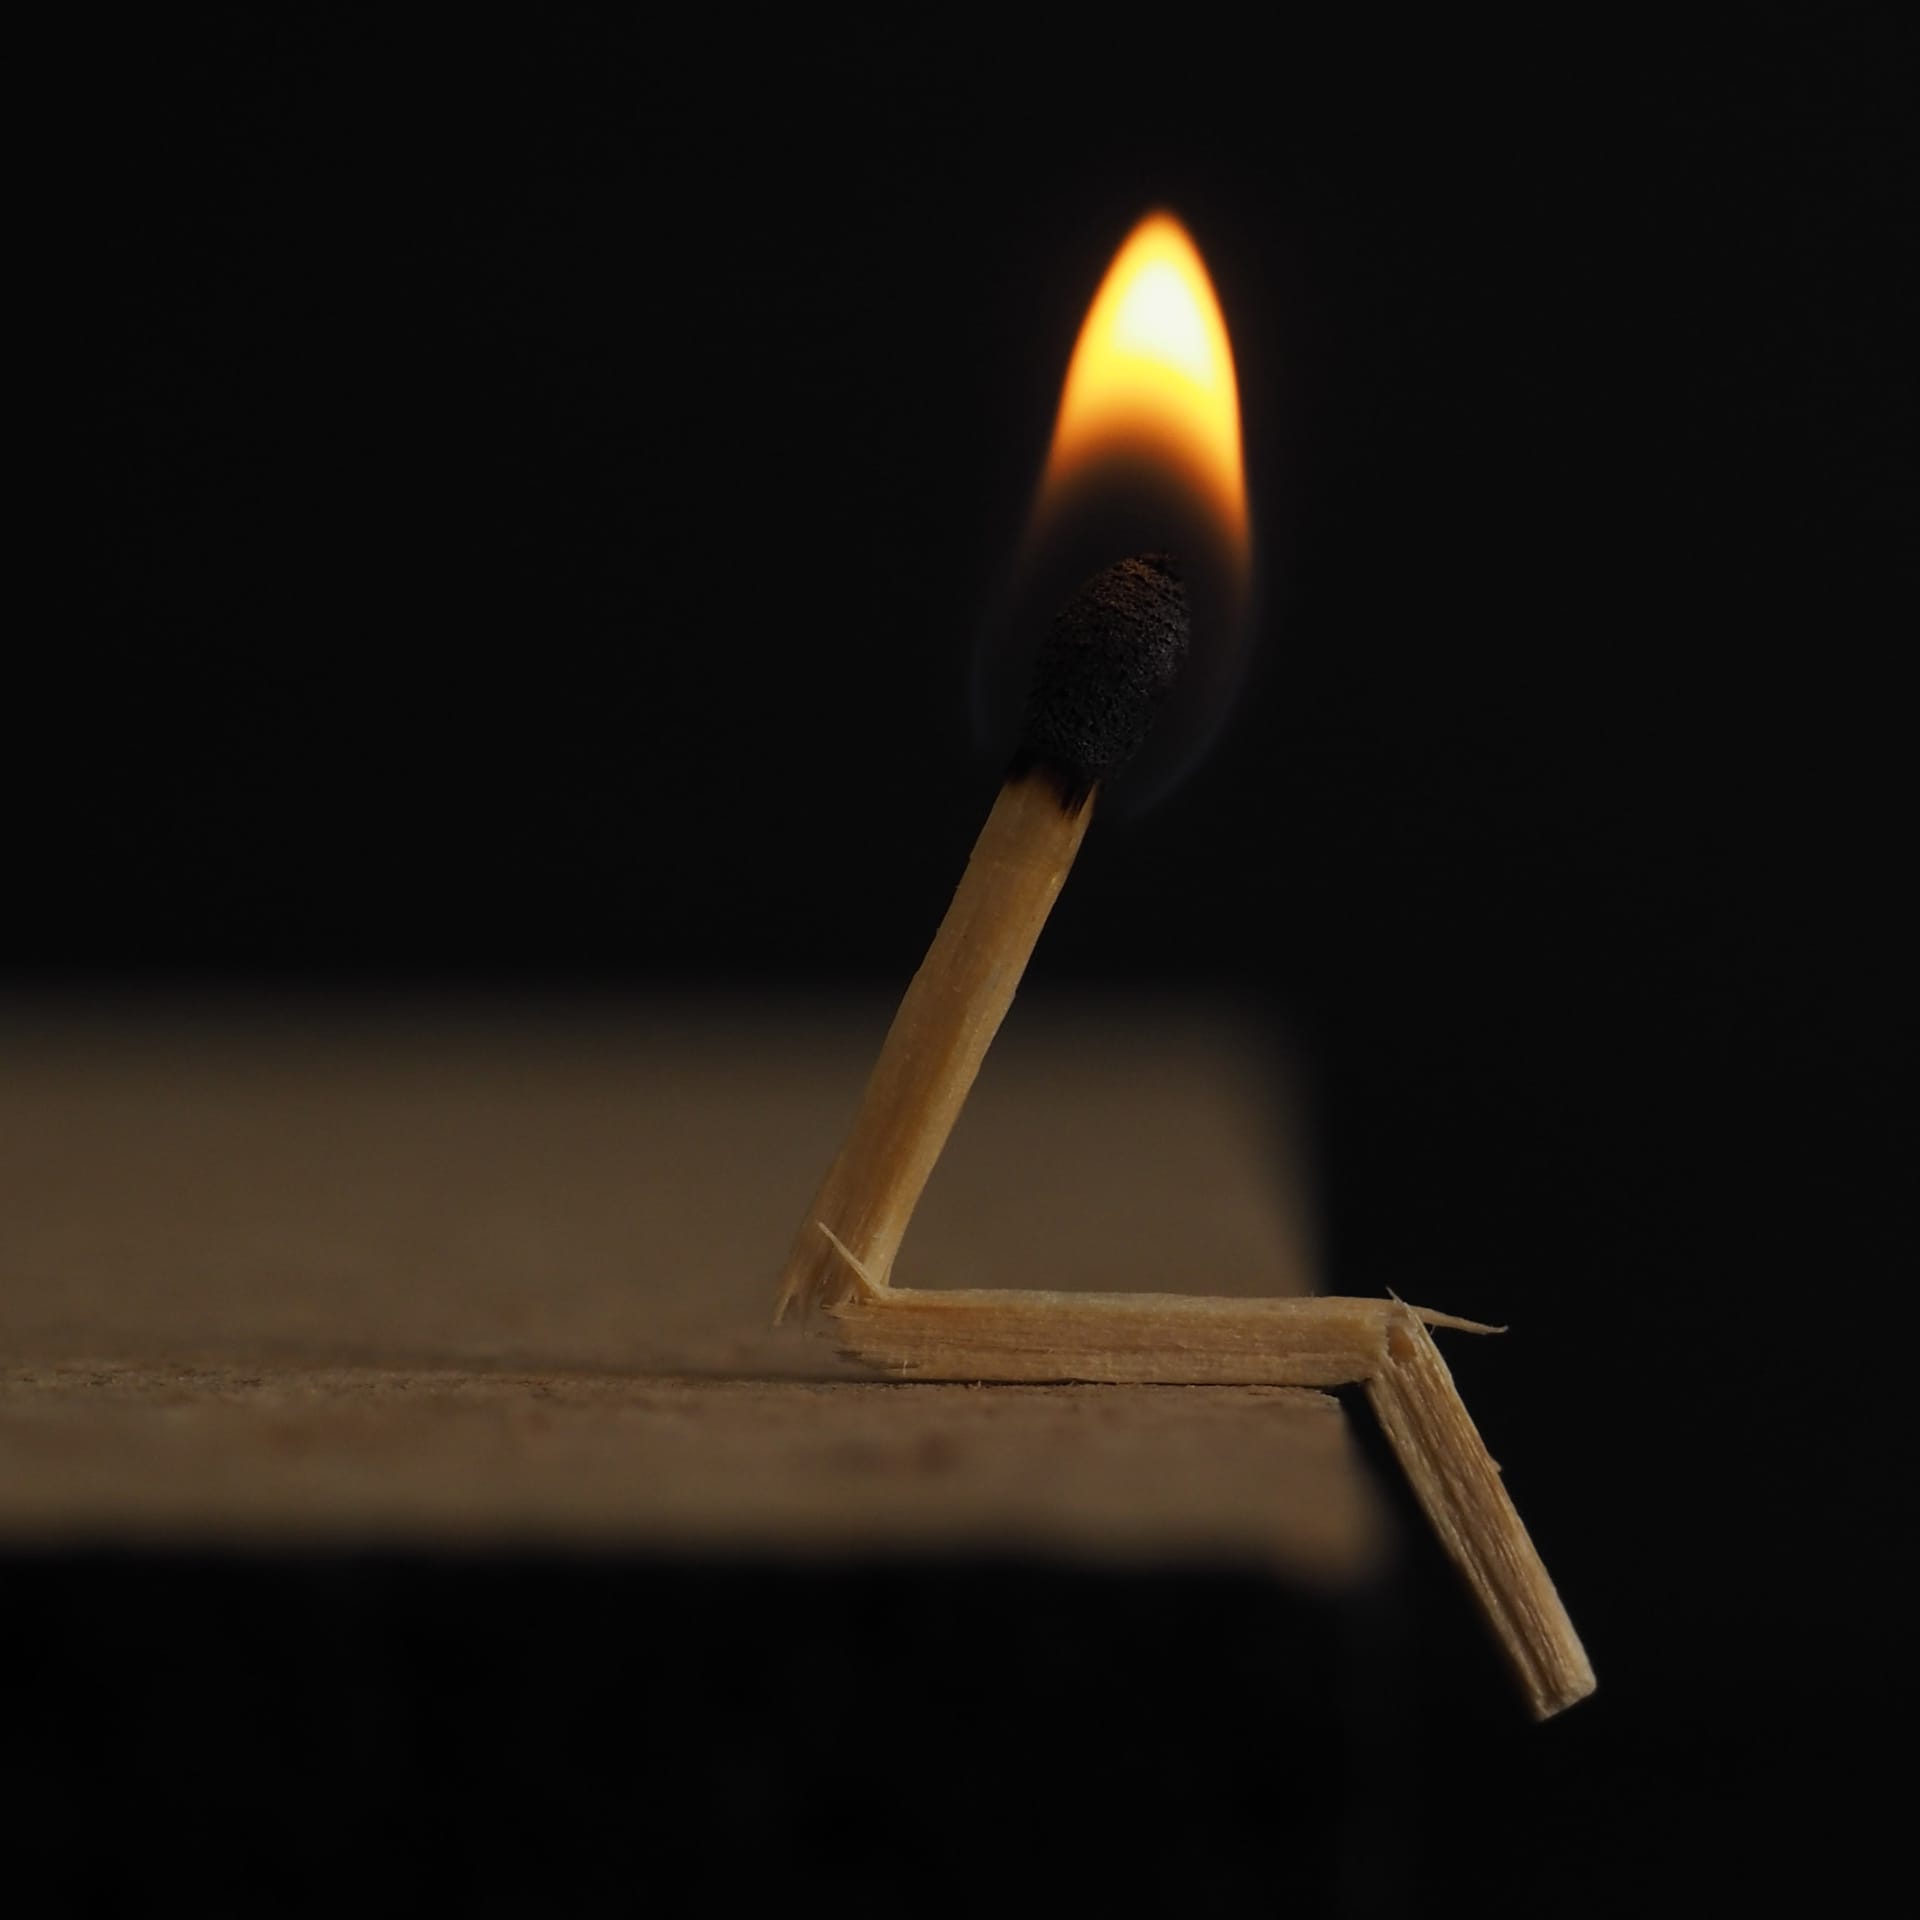 A lighted match on a wooden table